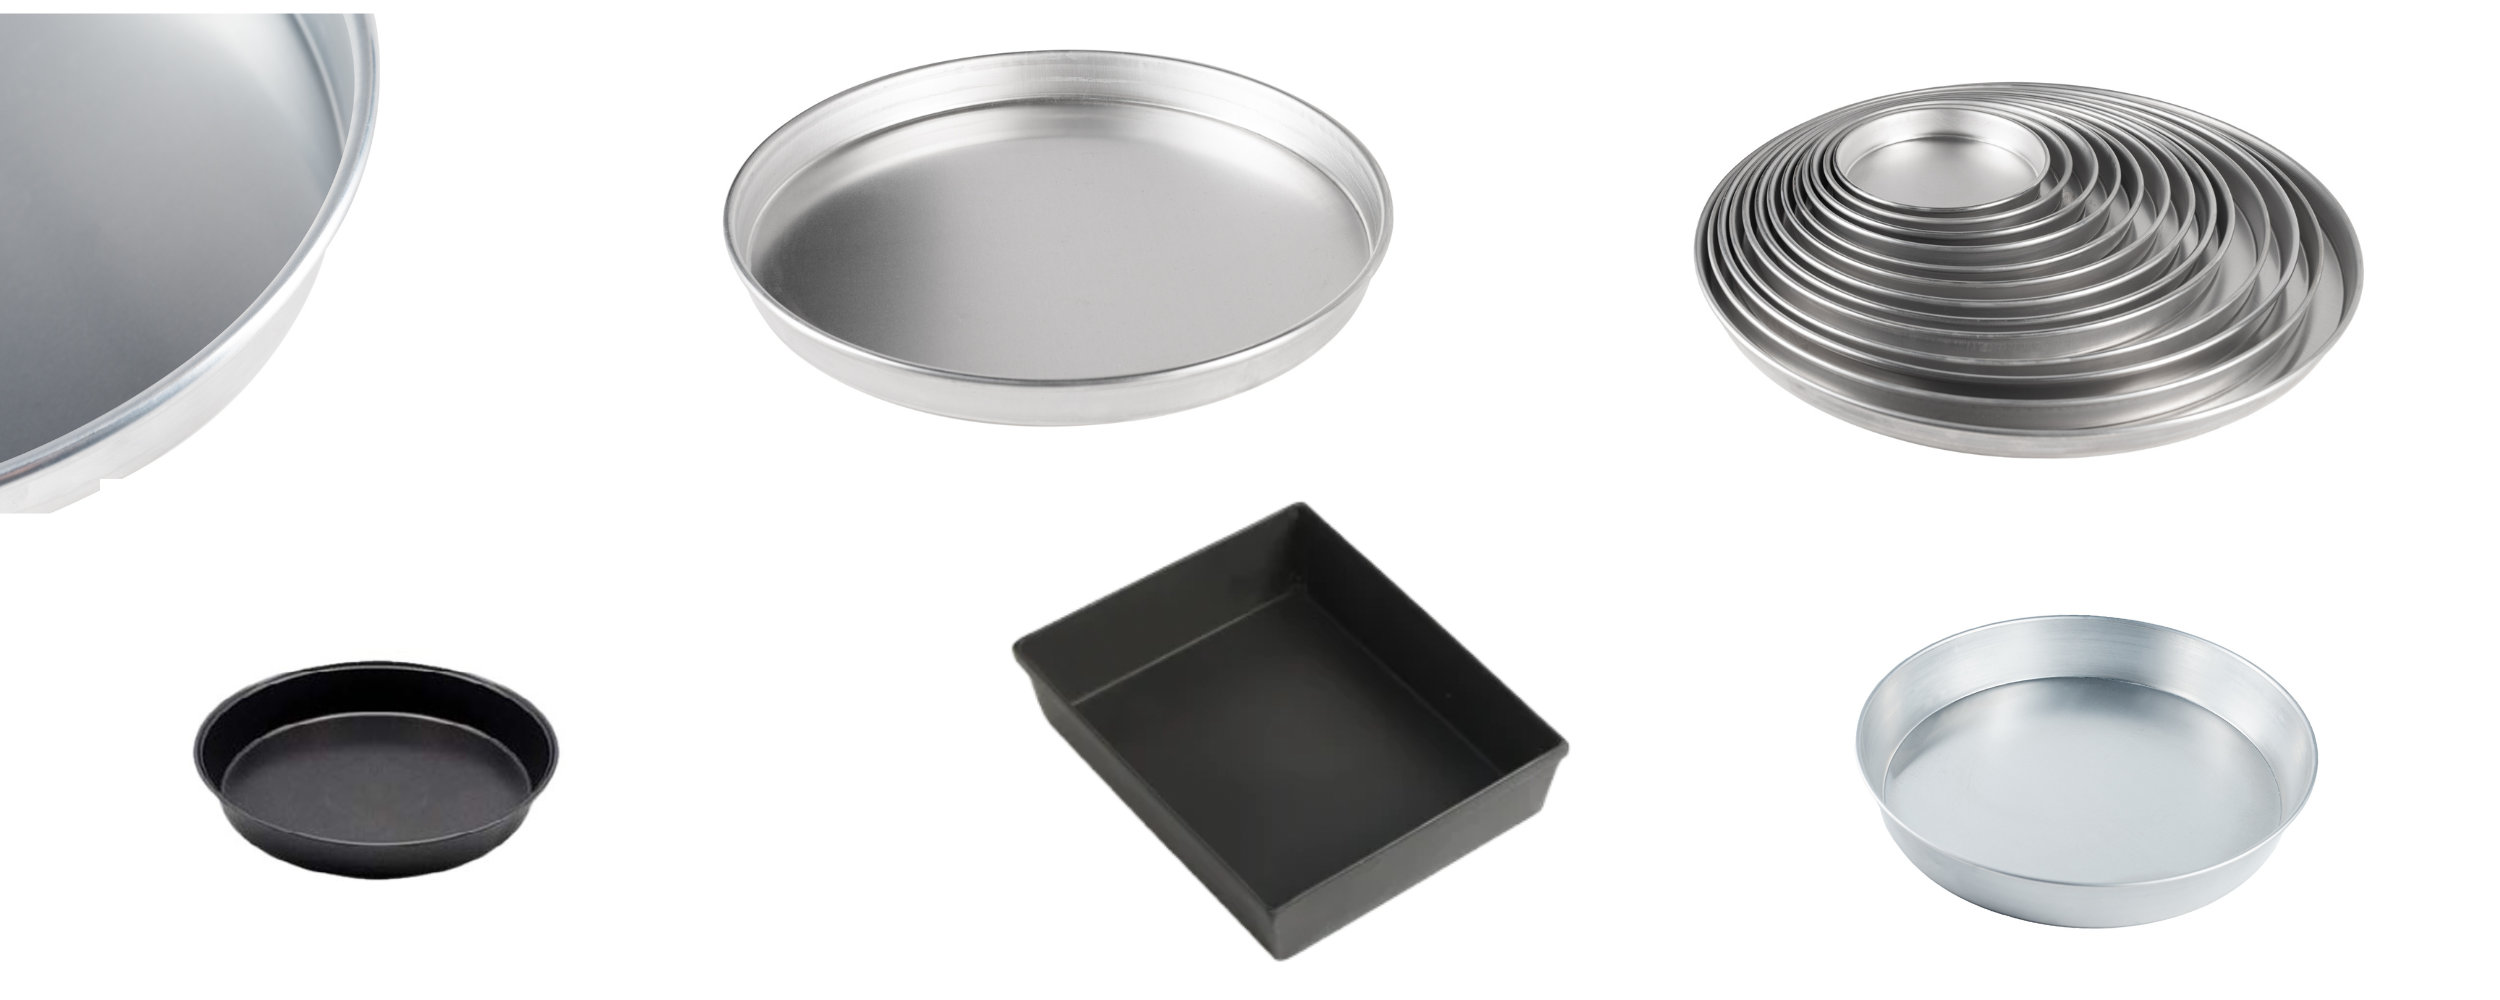 Types of deep dish pizza pans